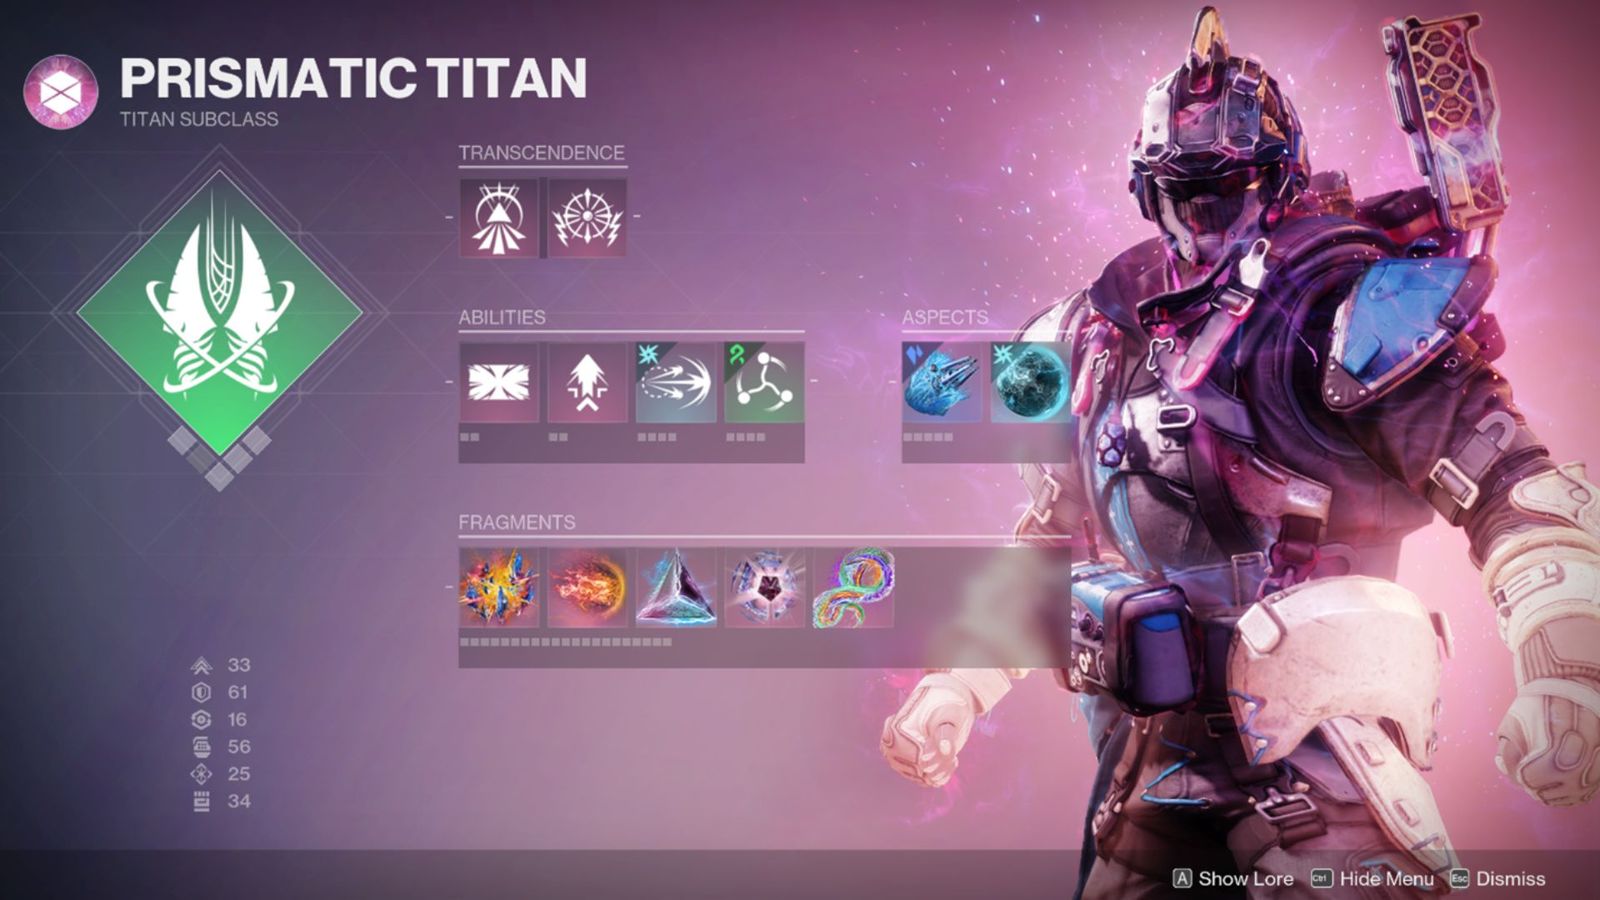 An image of the Prismatic Titan subclass